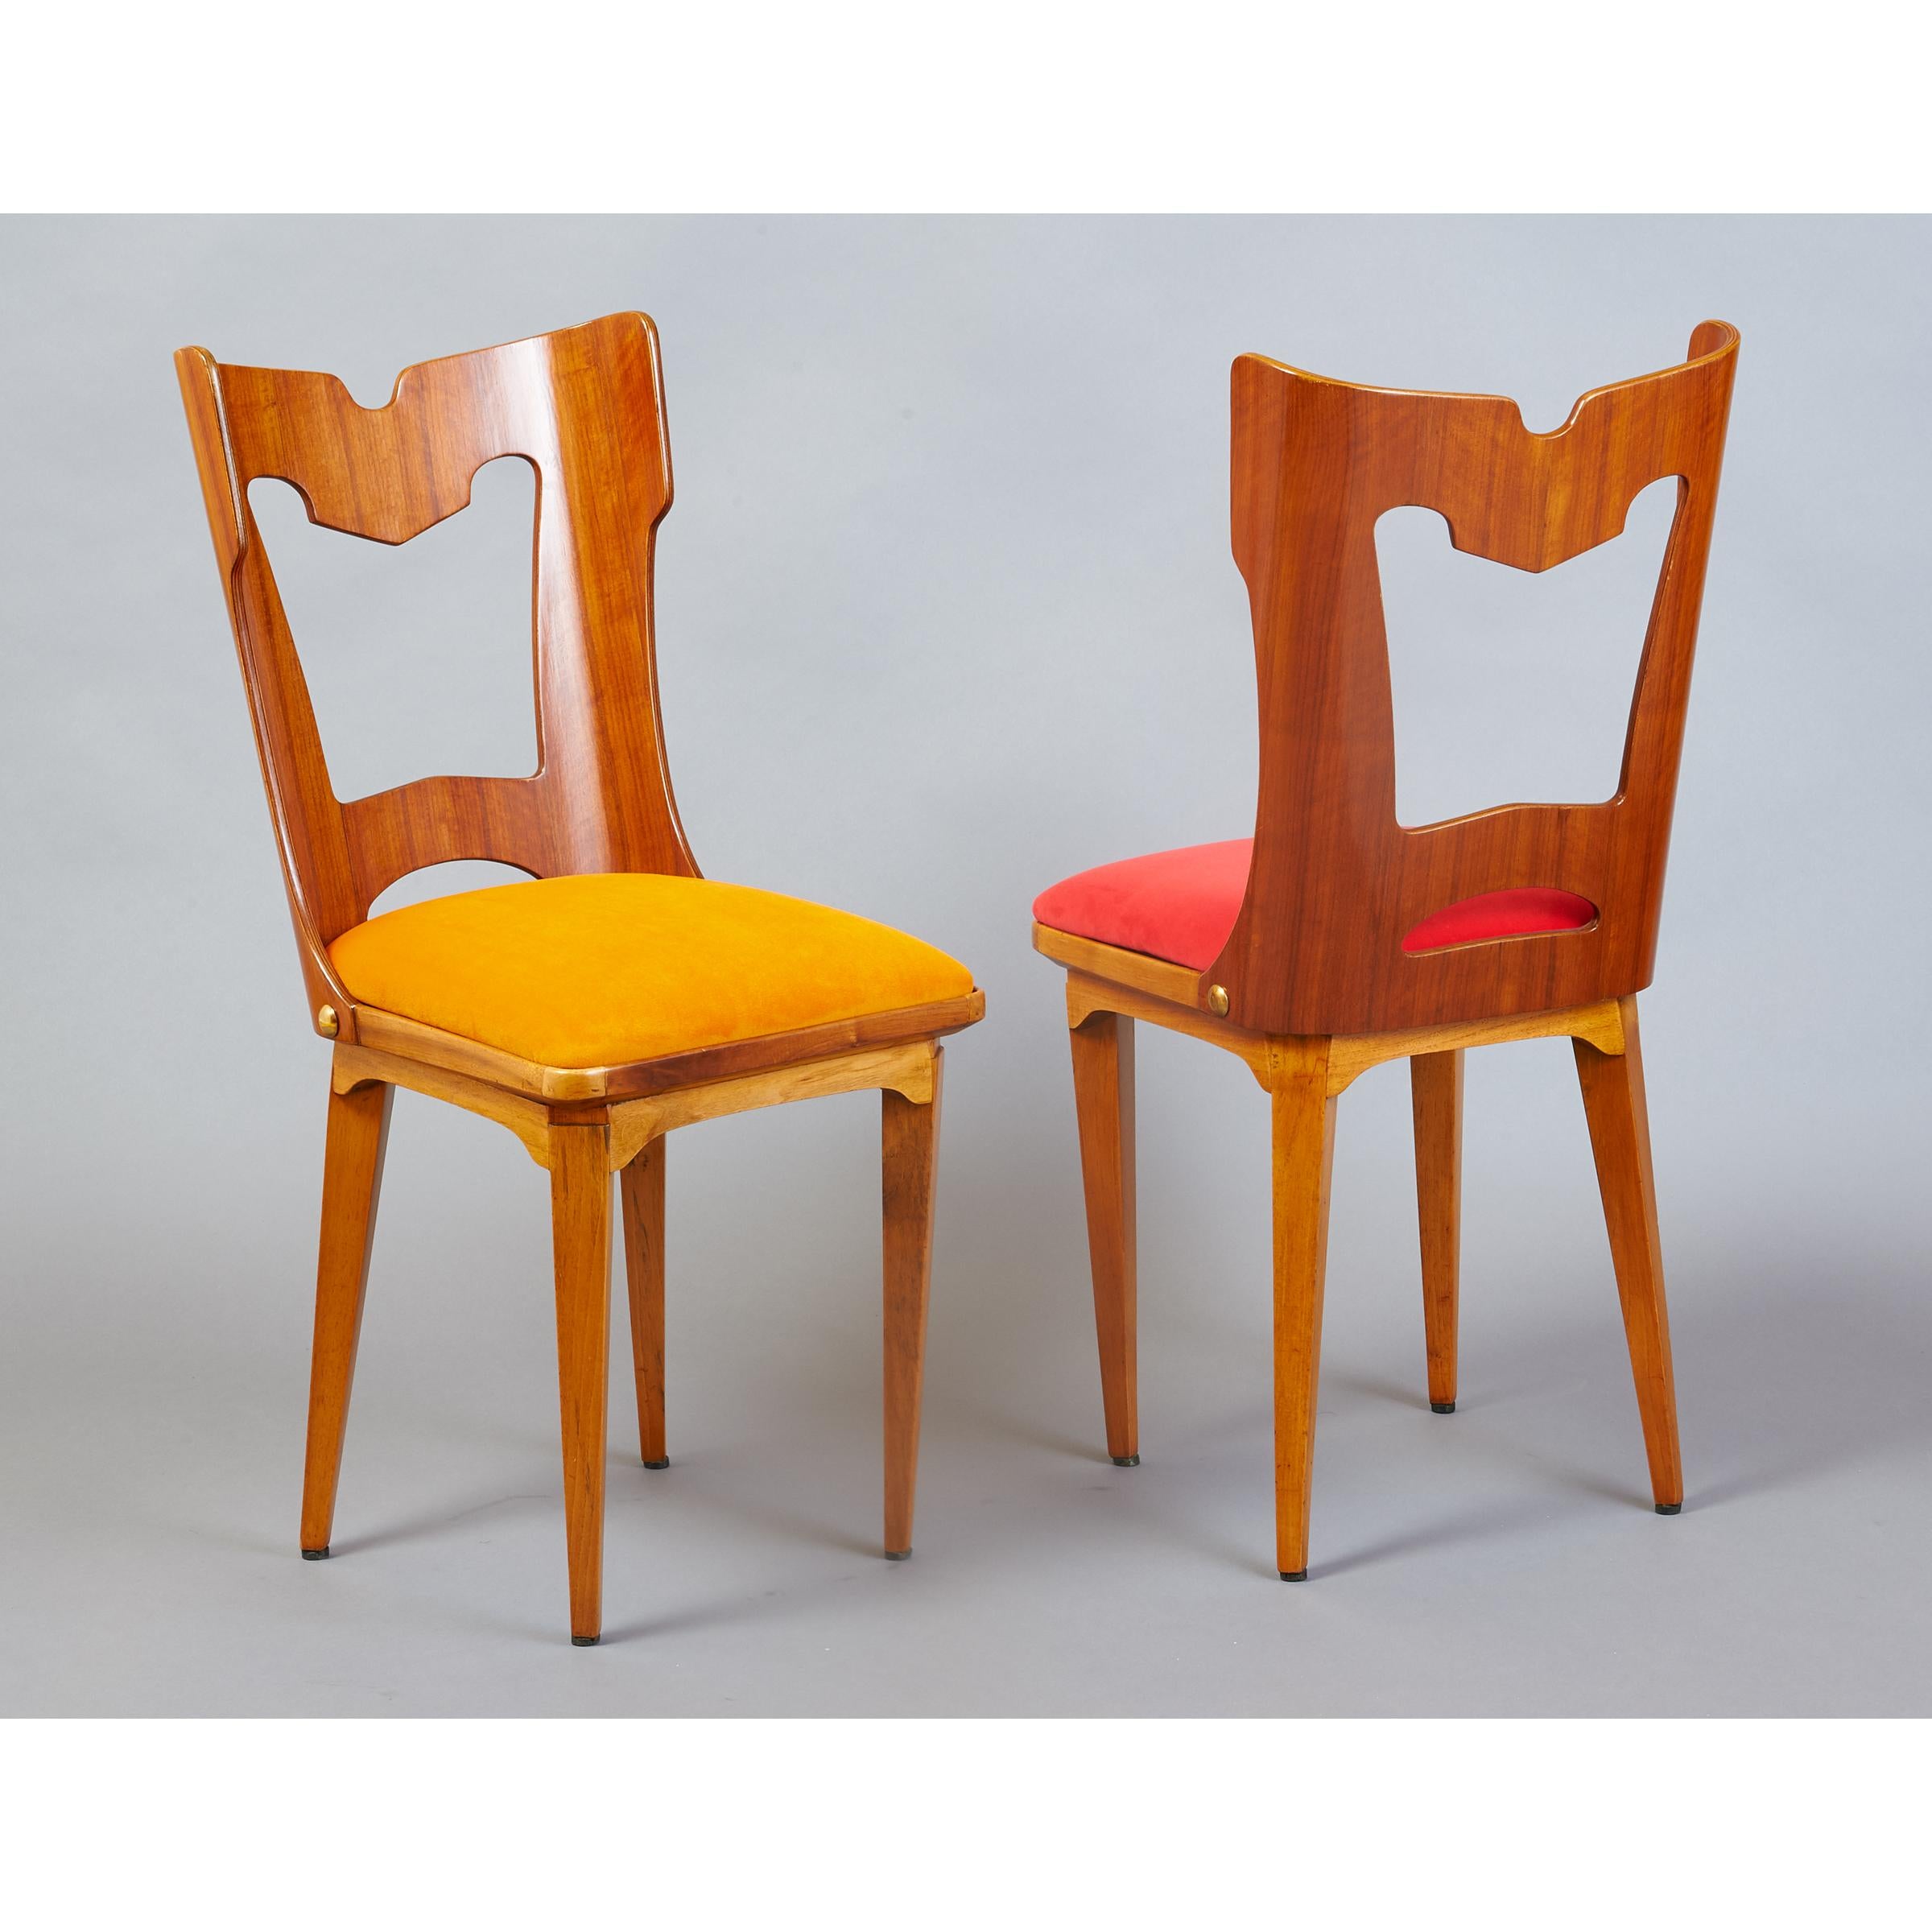 Italian Set of Four Sculptural Chairs, Italy, 1950s